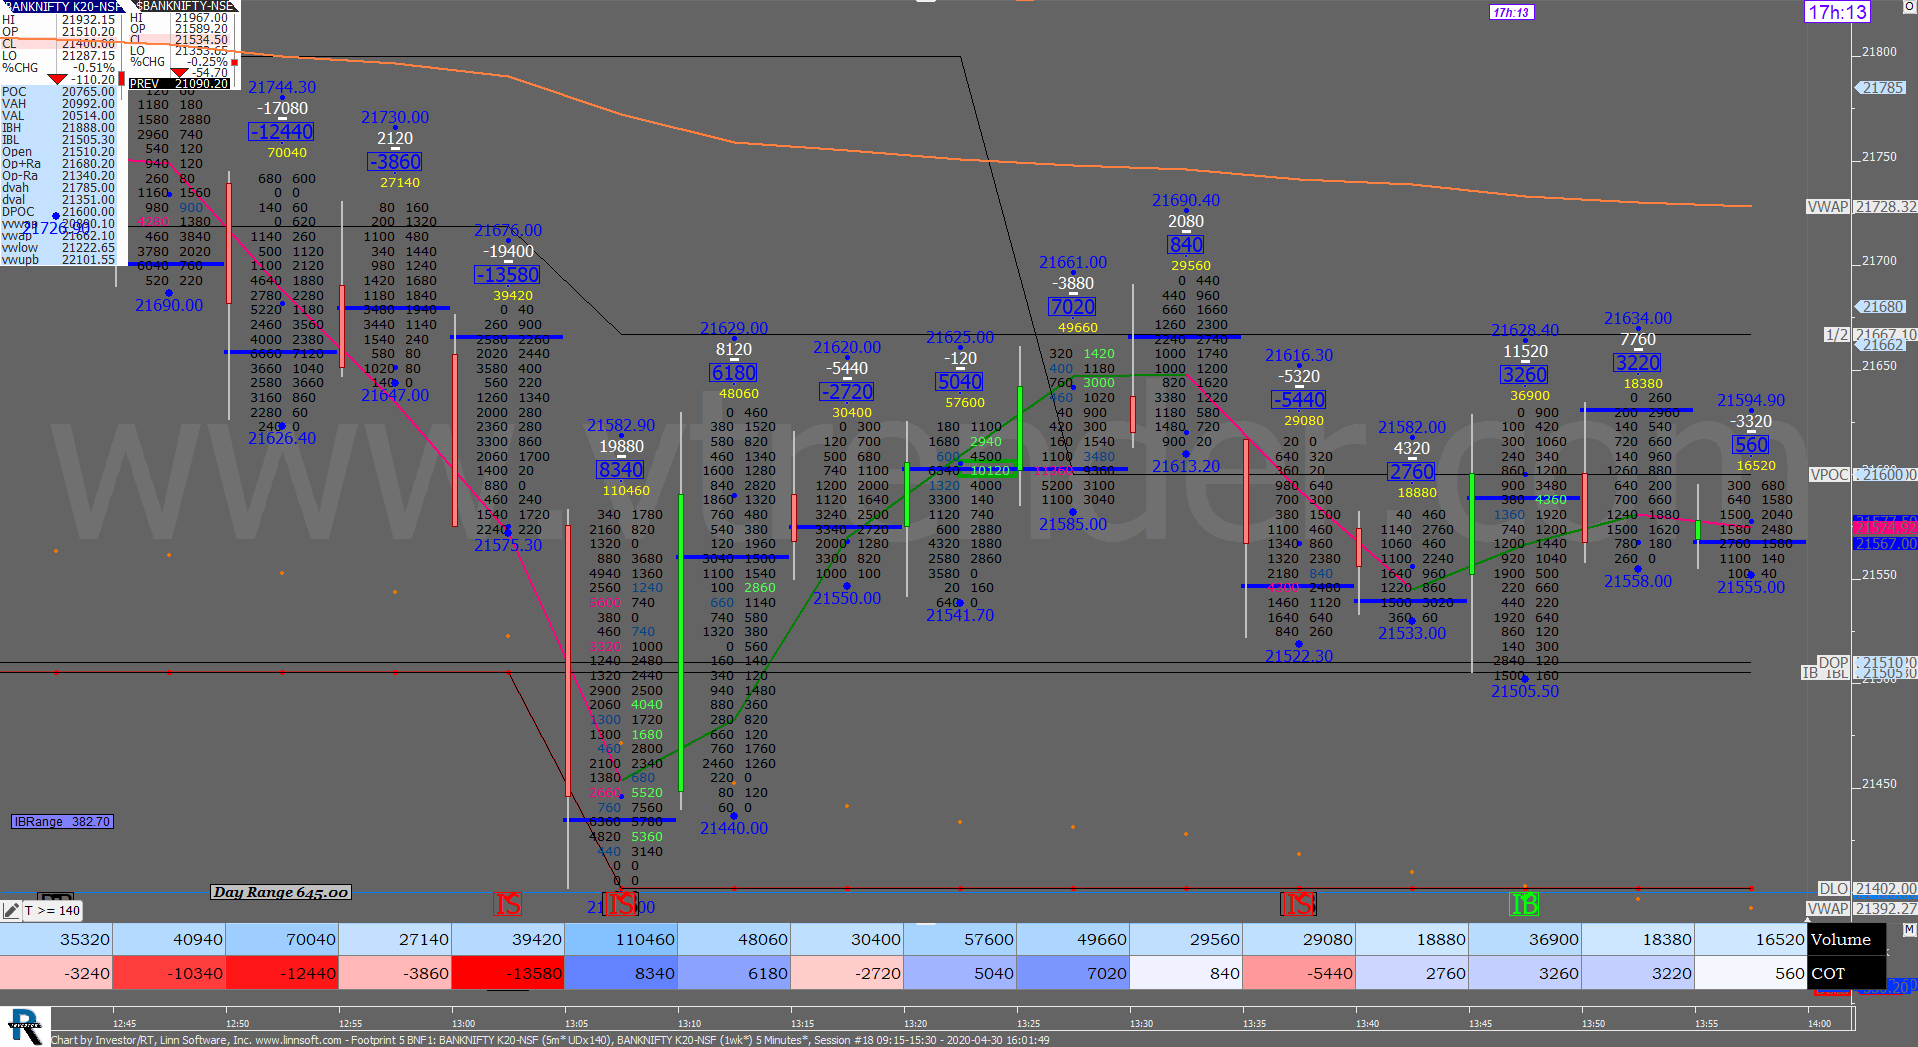 4 35 Order Flow Charts Dated 30Th Apr 2020 (5 Mins) Banknifty Futures, Day Trading, Intraday Trading, Intraday Trading Strategies, Nifty Futures, Order Flow Analysis, Support And Resistance, Trading Strategies, Volume Profile Trading